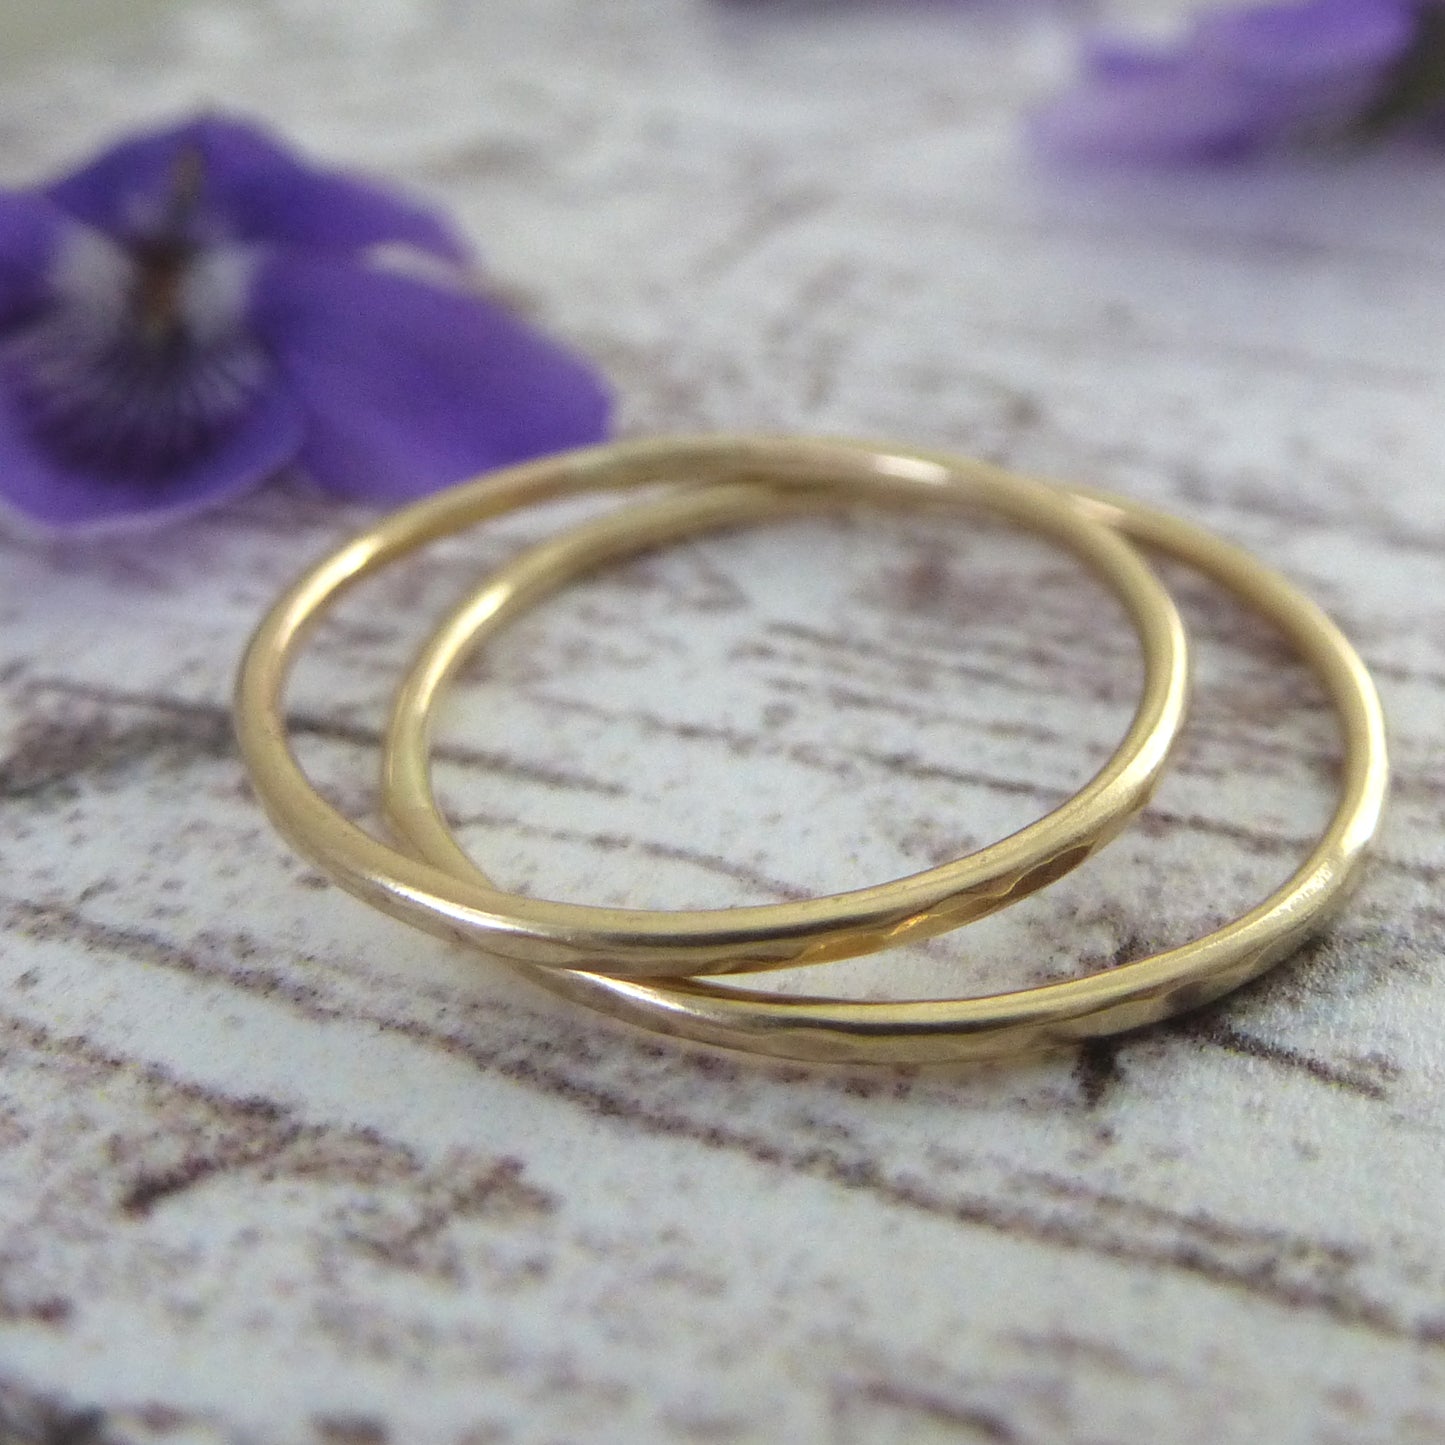 Skinny hammered band ring - 9ct yellow gold